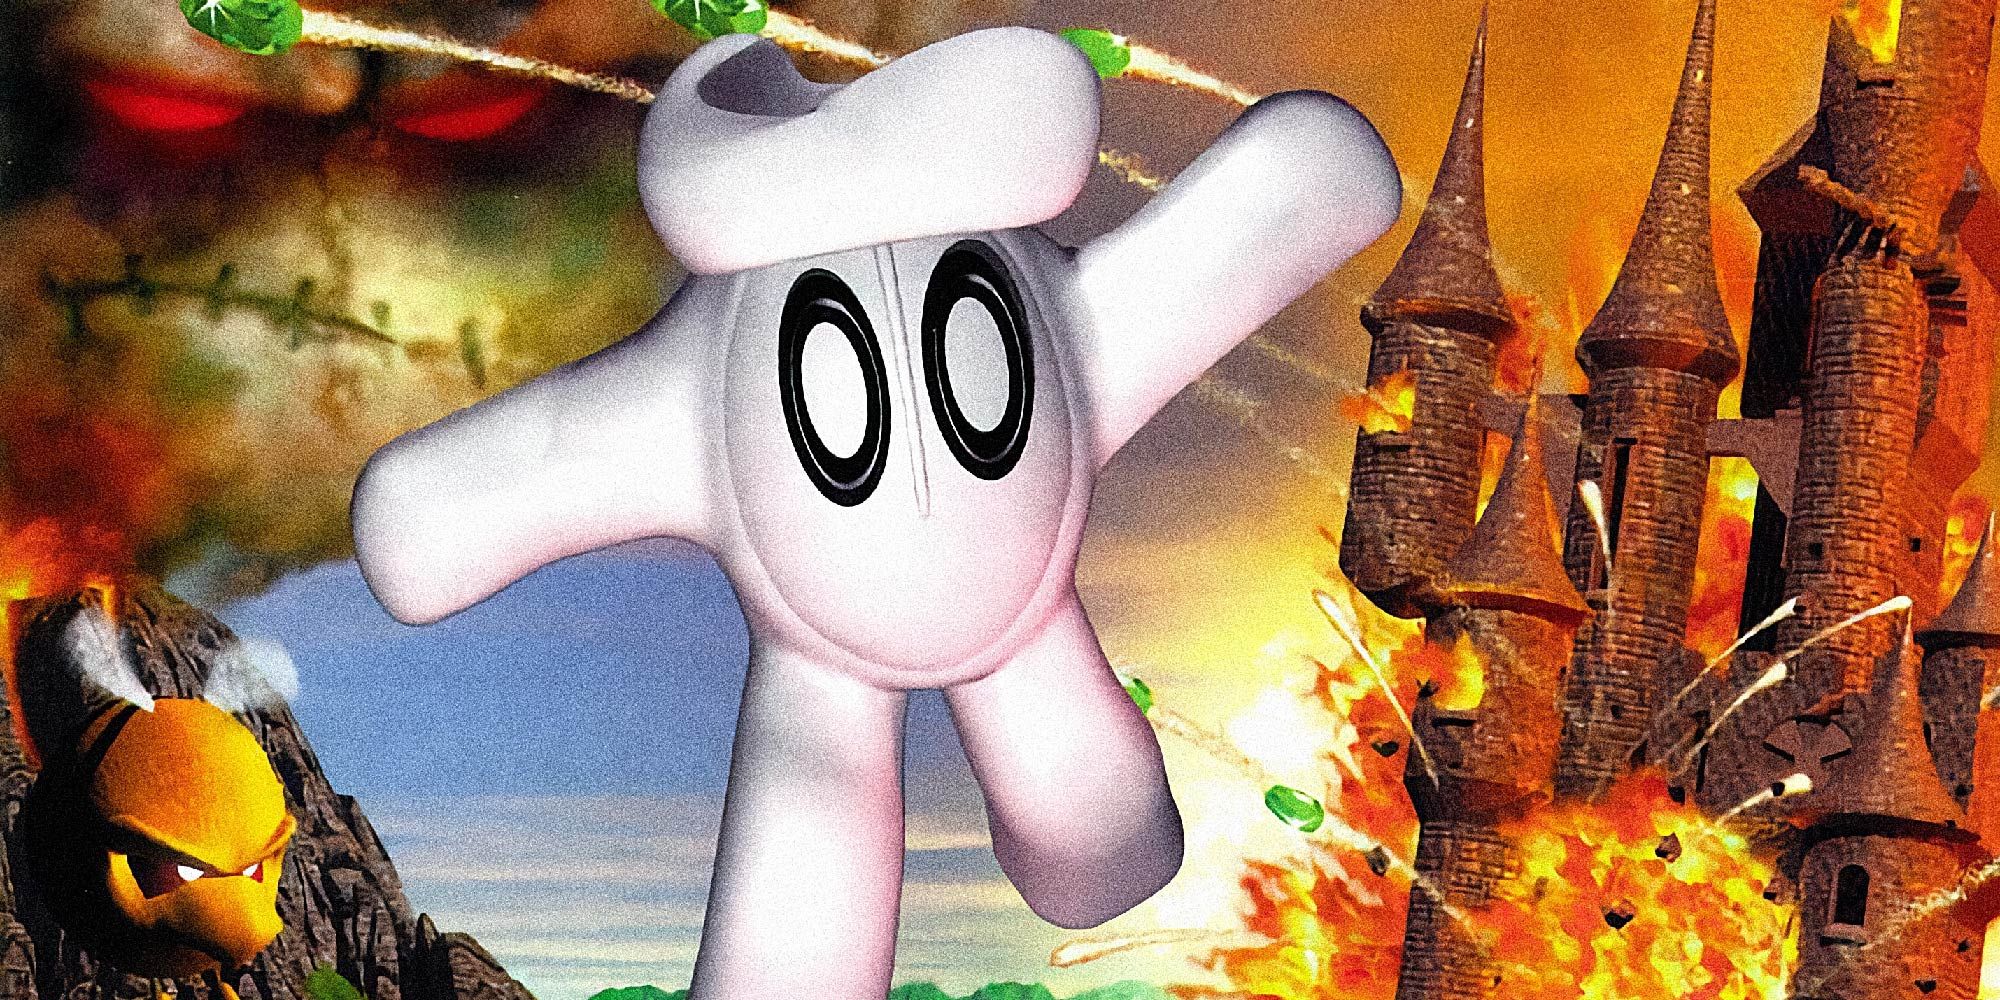 Glover balancing in front of an exploding castle.